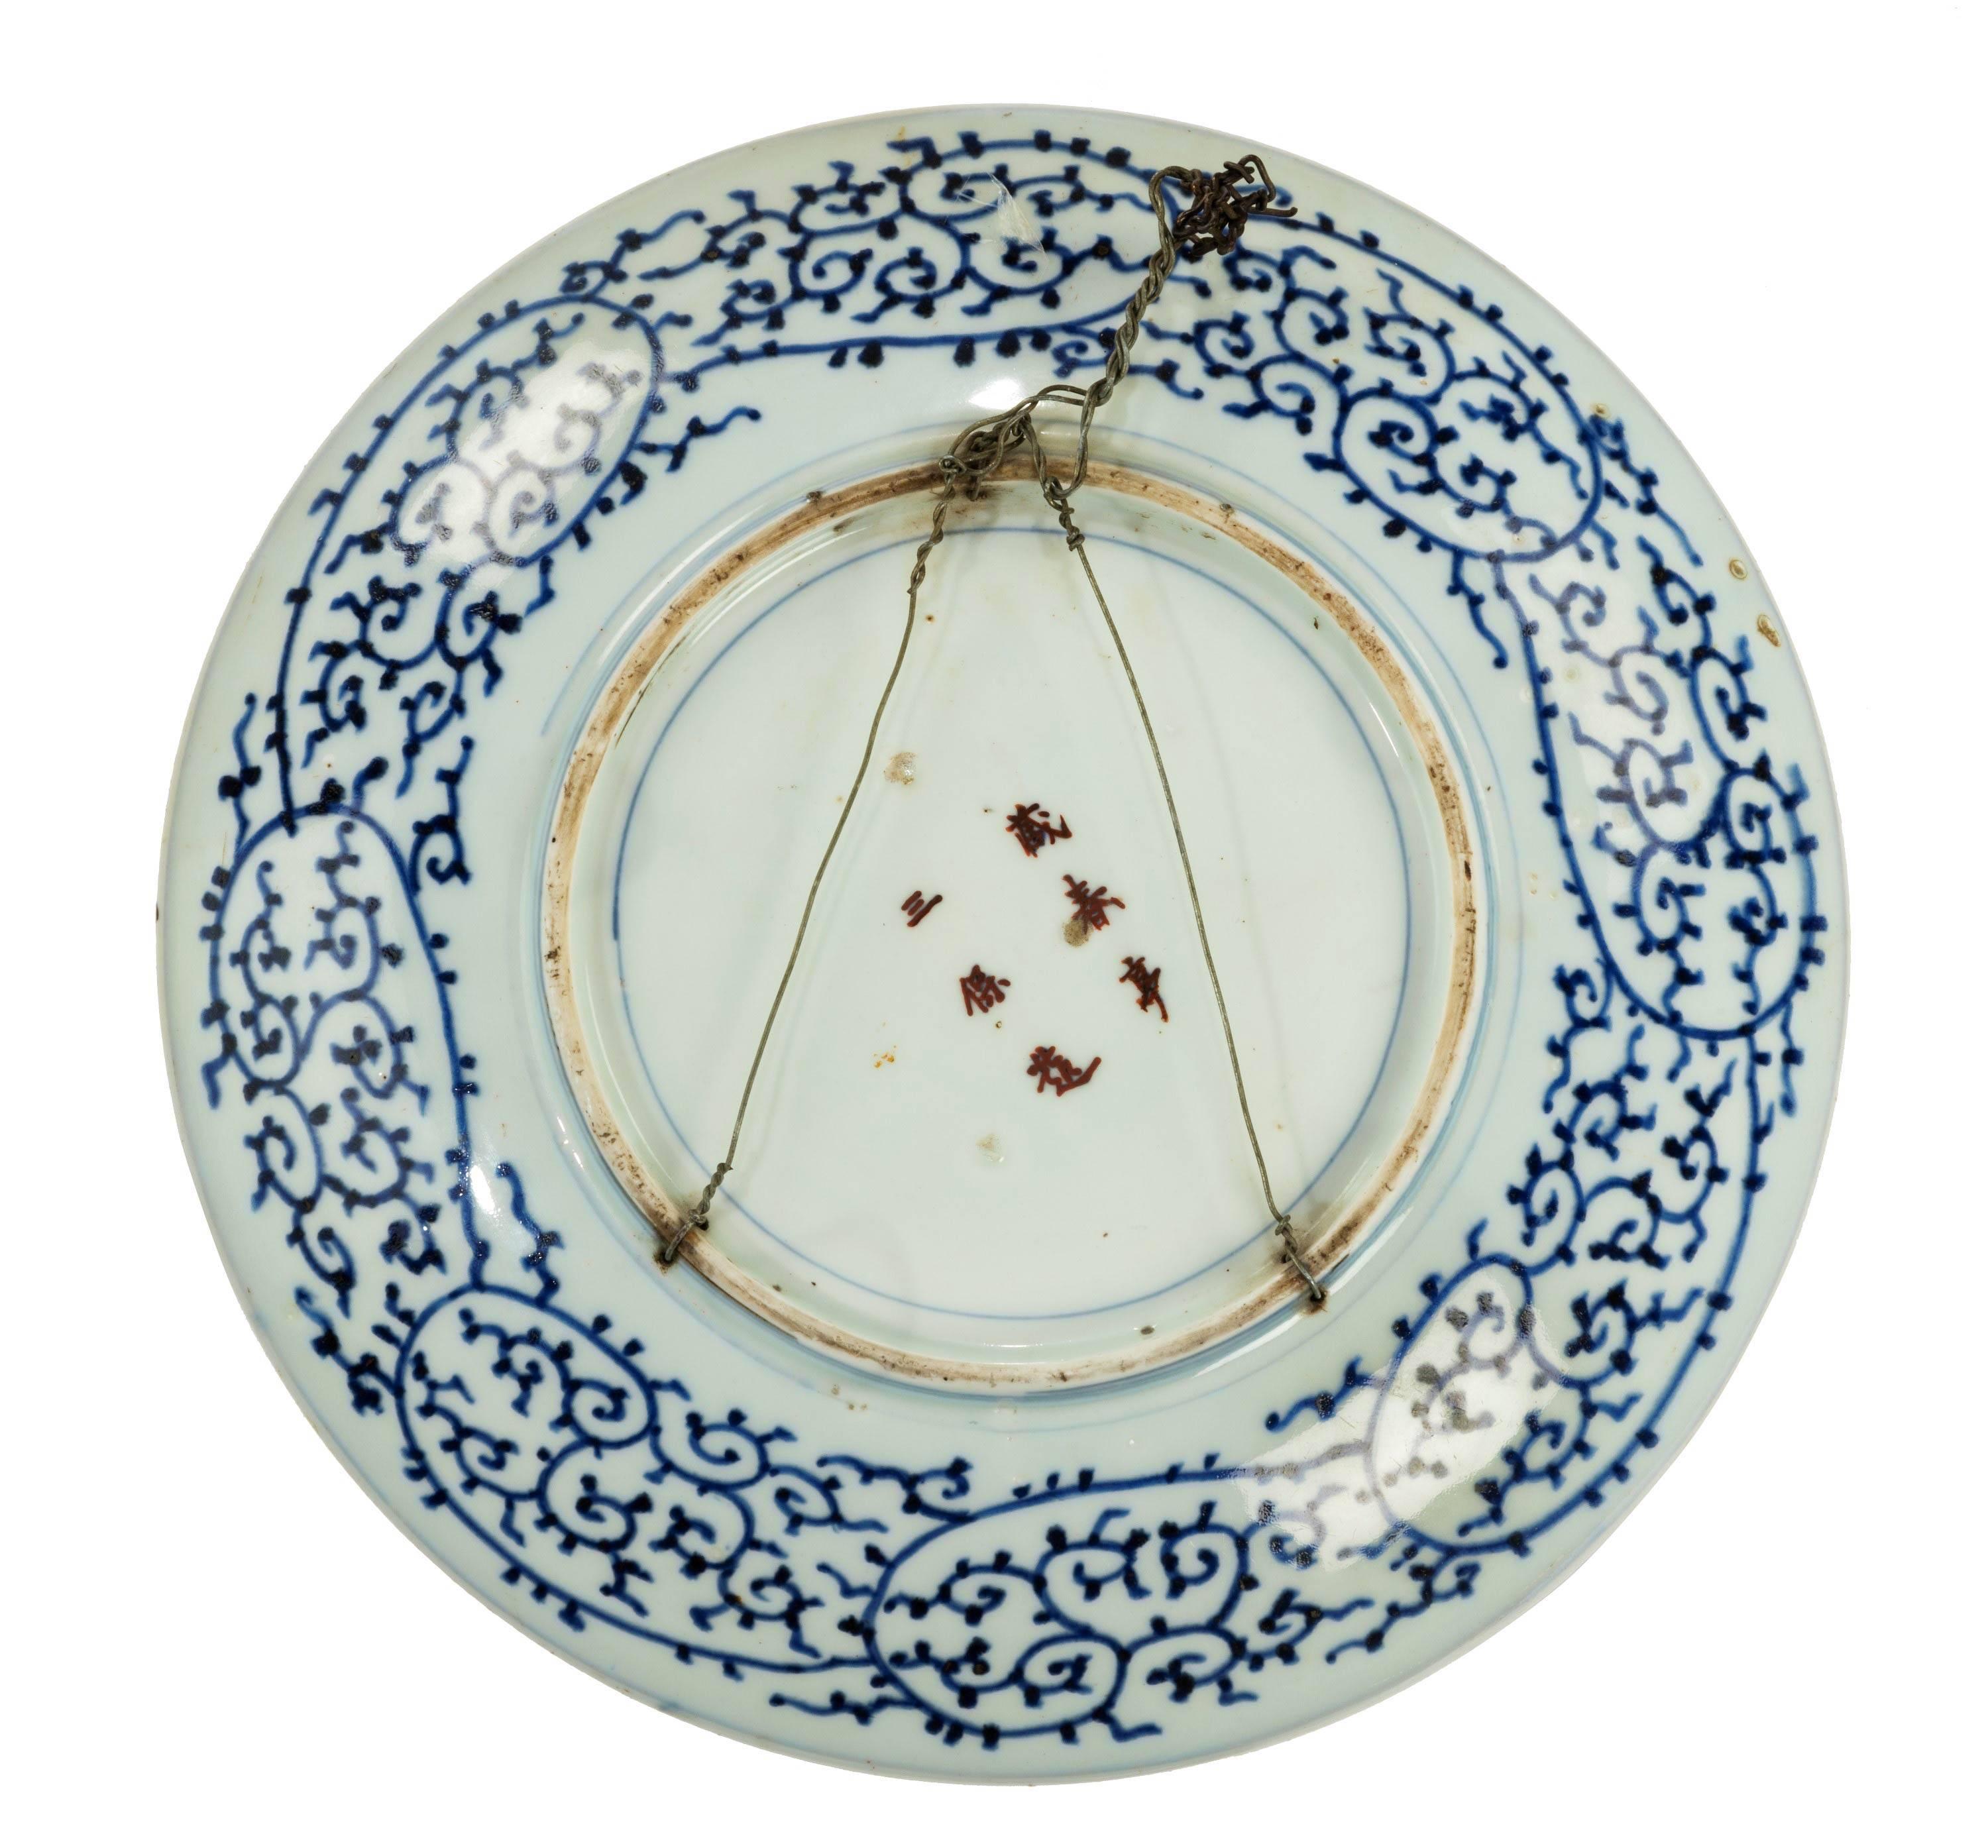 Chinese Arita Porcelain Charger with the Six Character Mark of Meiji Taisho Period